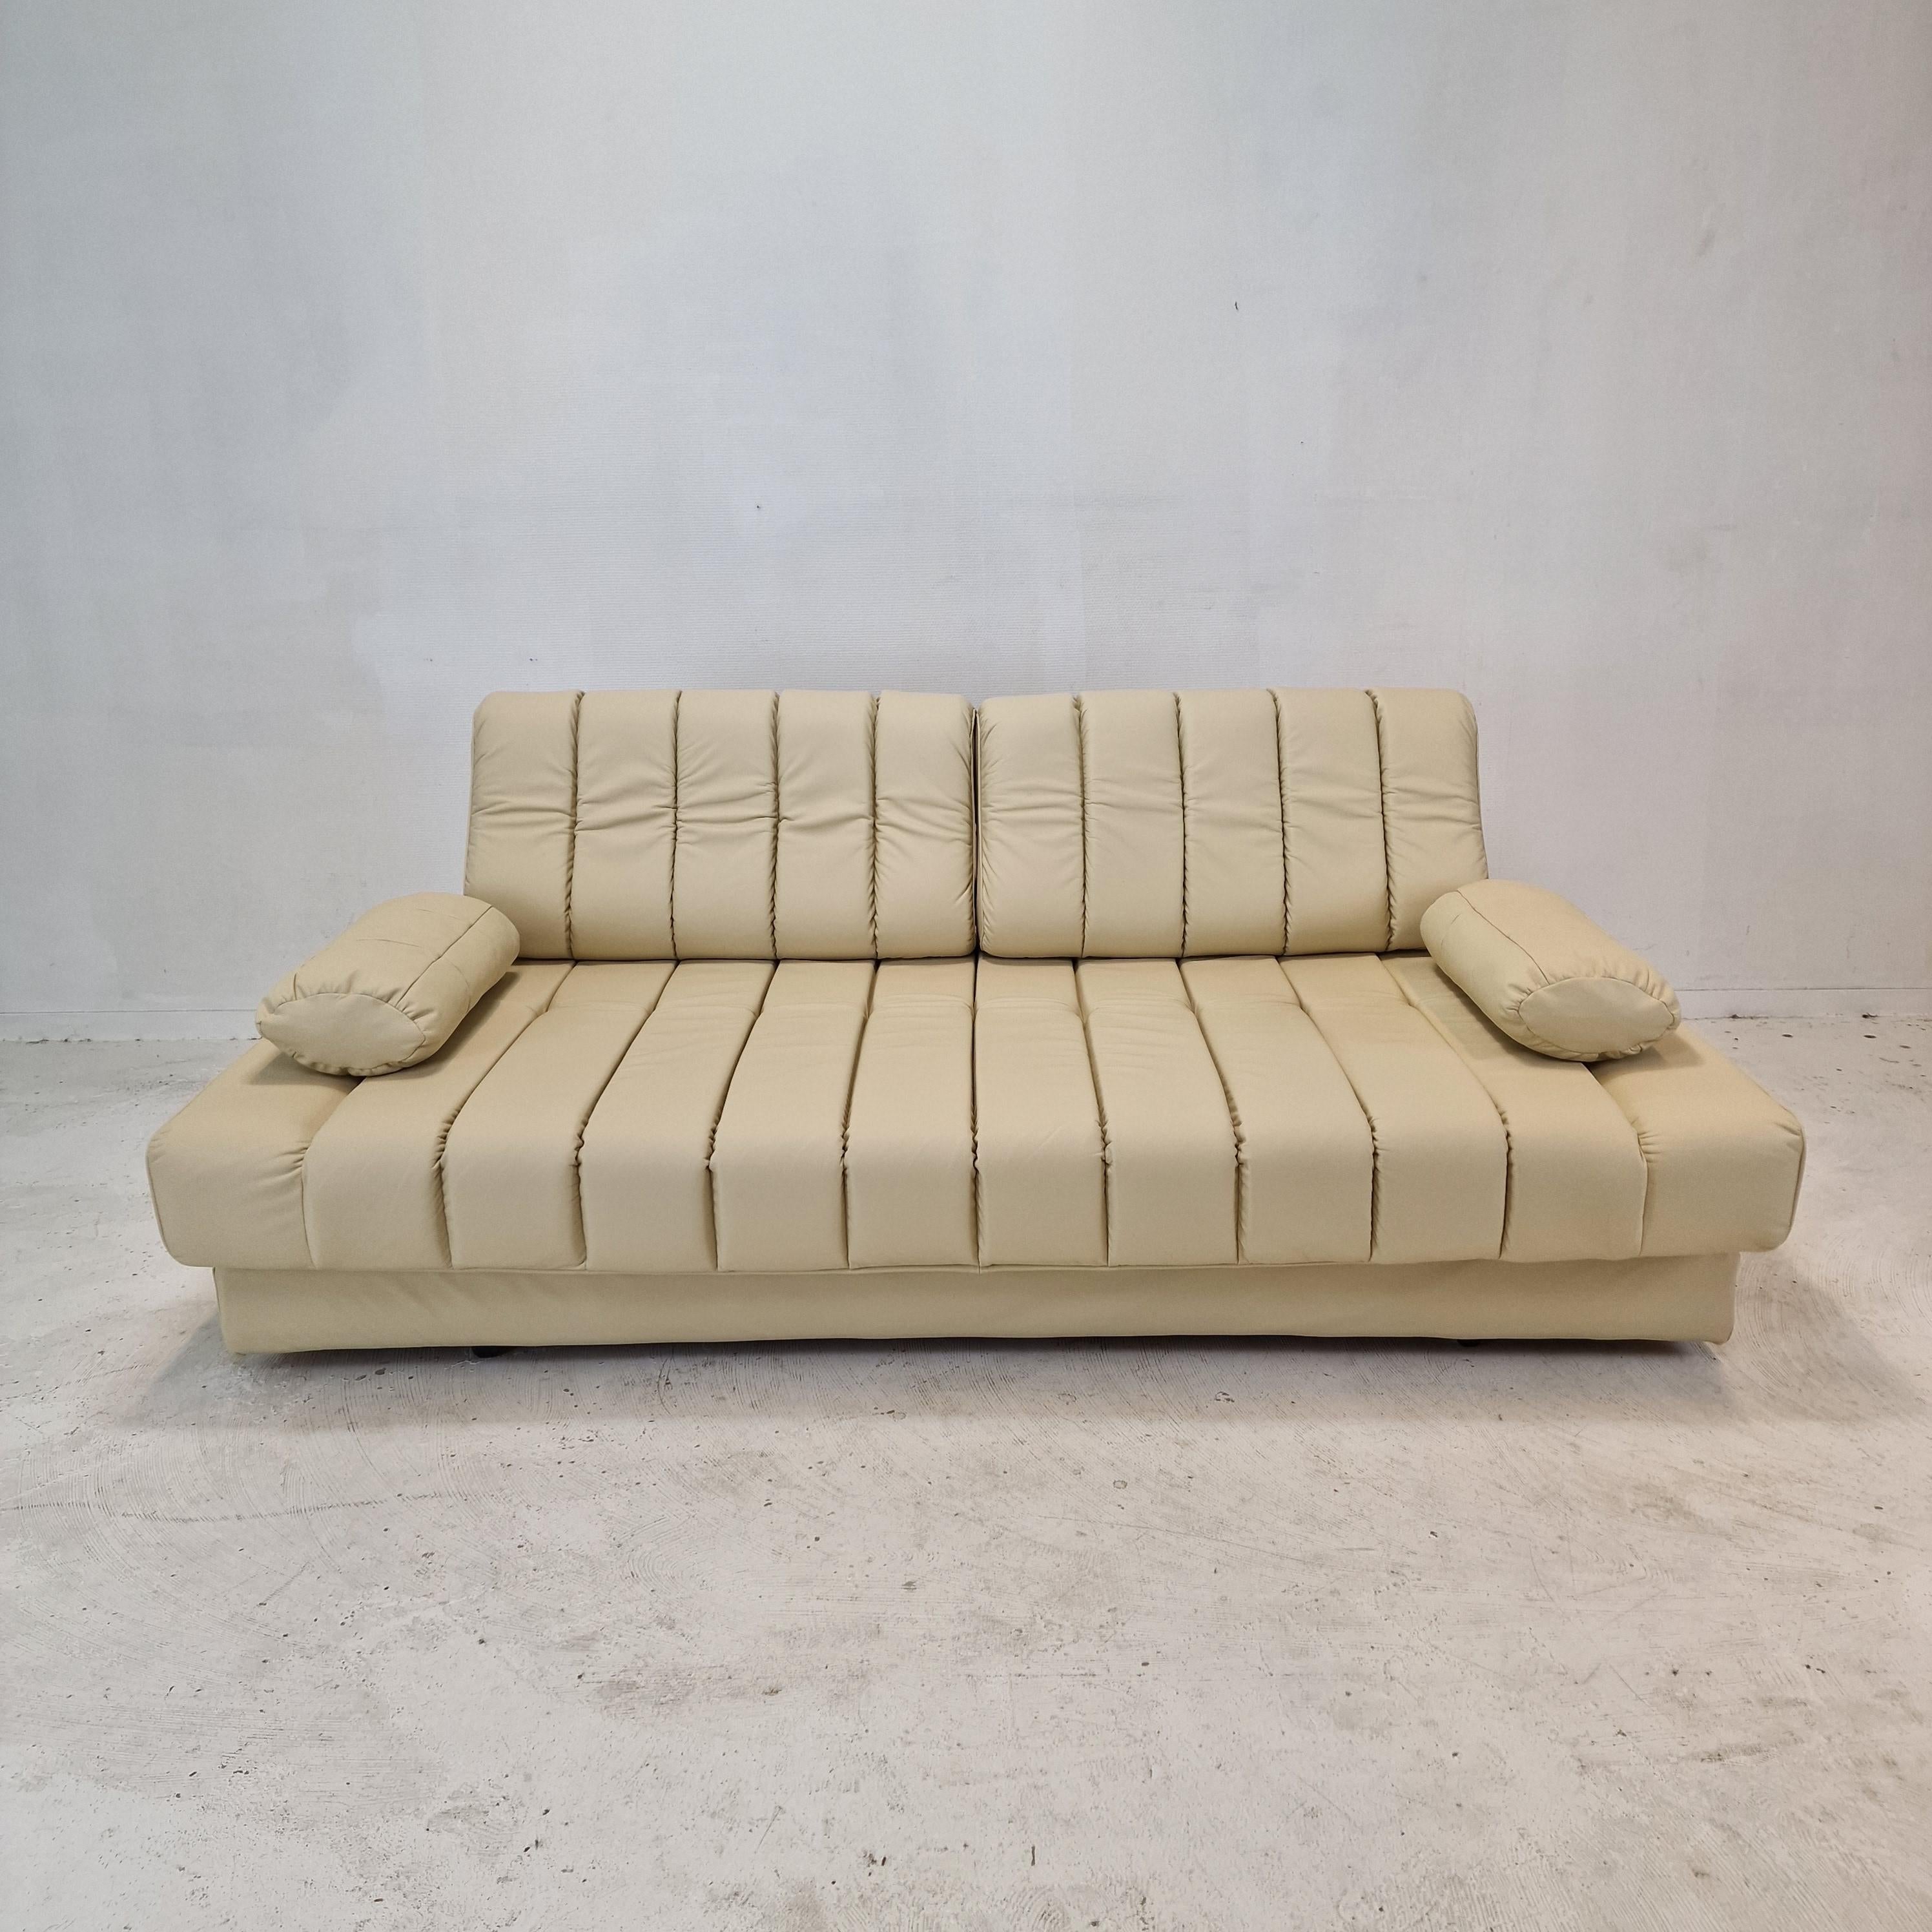 Late 20th Century DS-85 Sofa or Daybed by De Sede, Switzerland 1970s For Sale